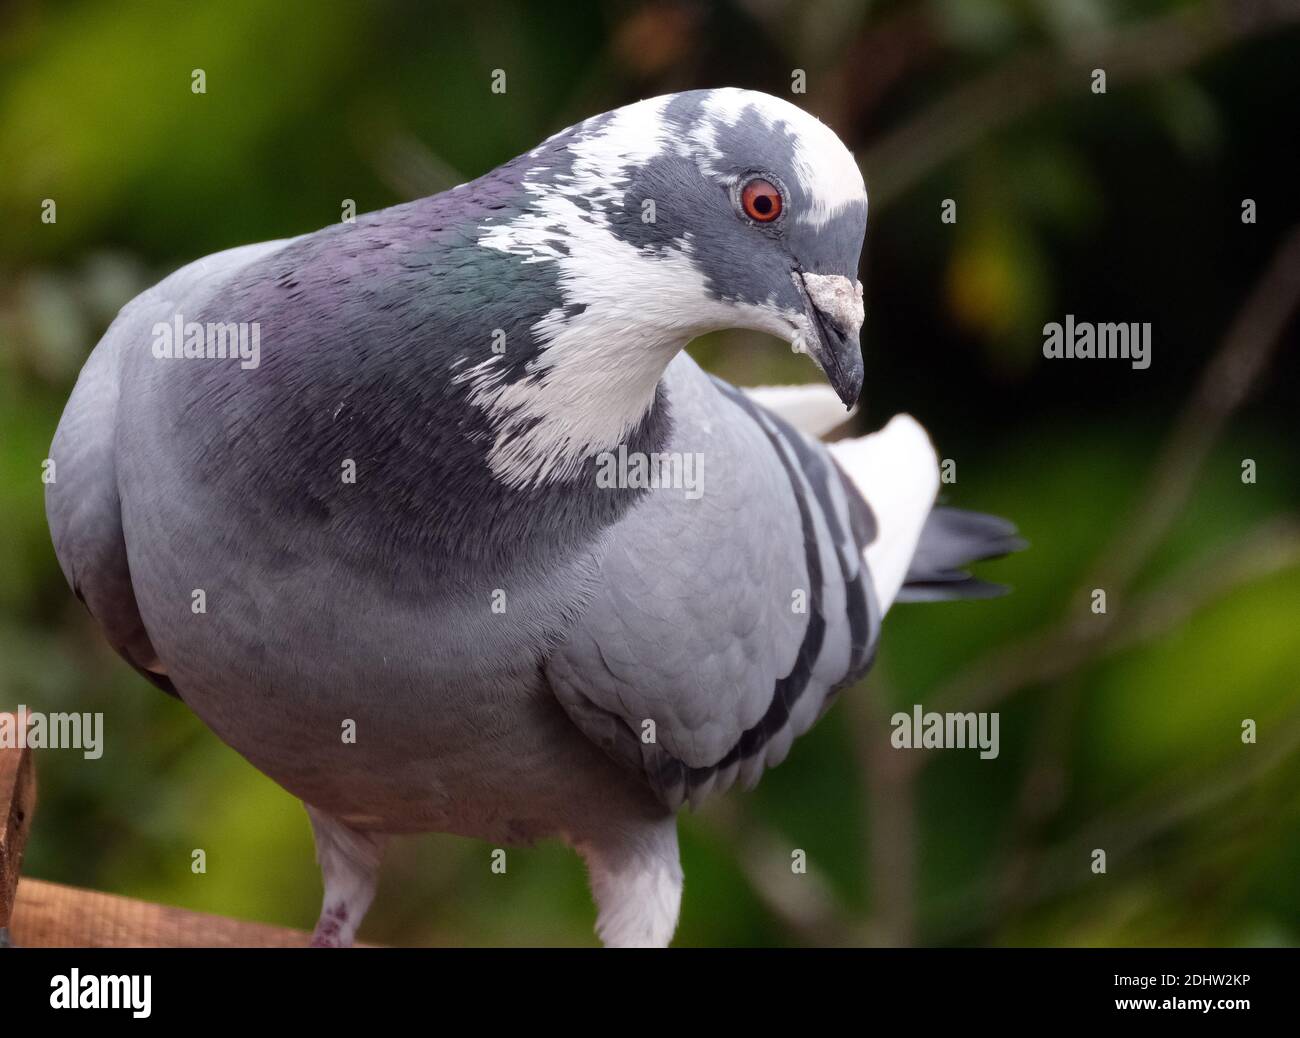 Pigeon  in urban house garden searching for food. Stock Photo